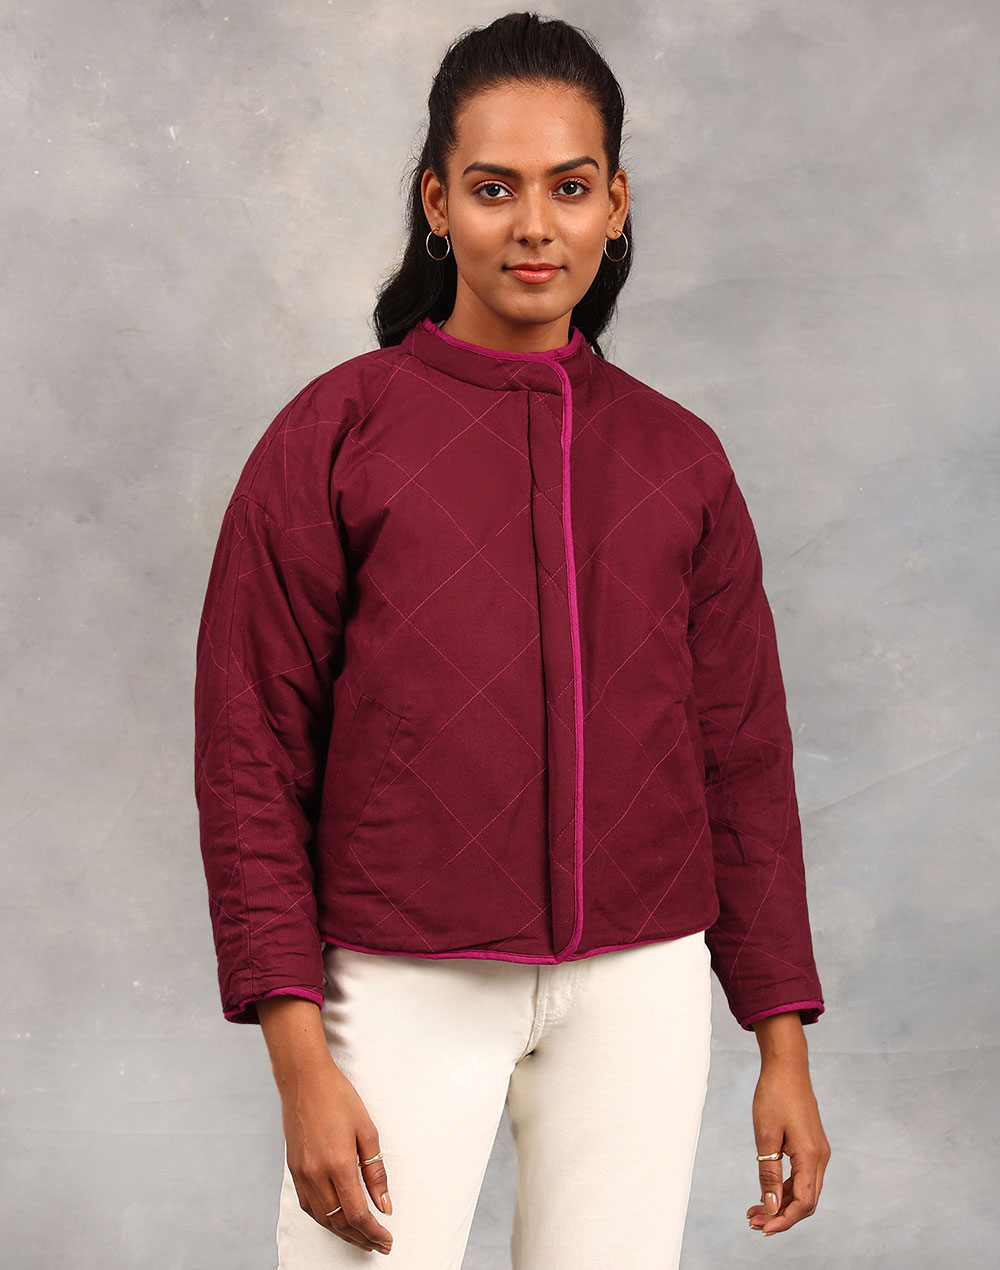 FabNu Purple Cotton Linen Flax Quilted Reversible Jacket